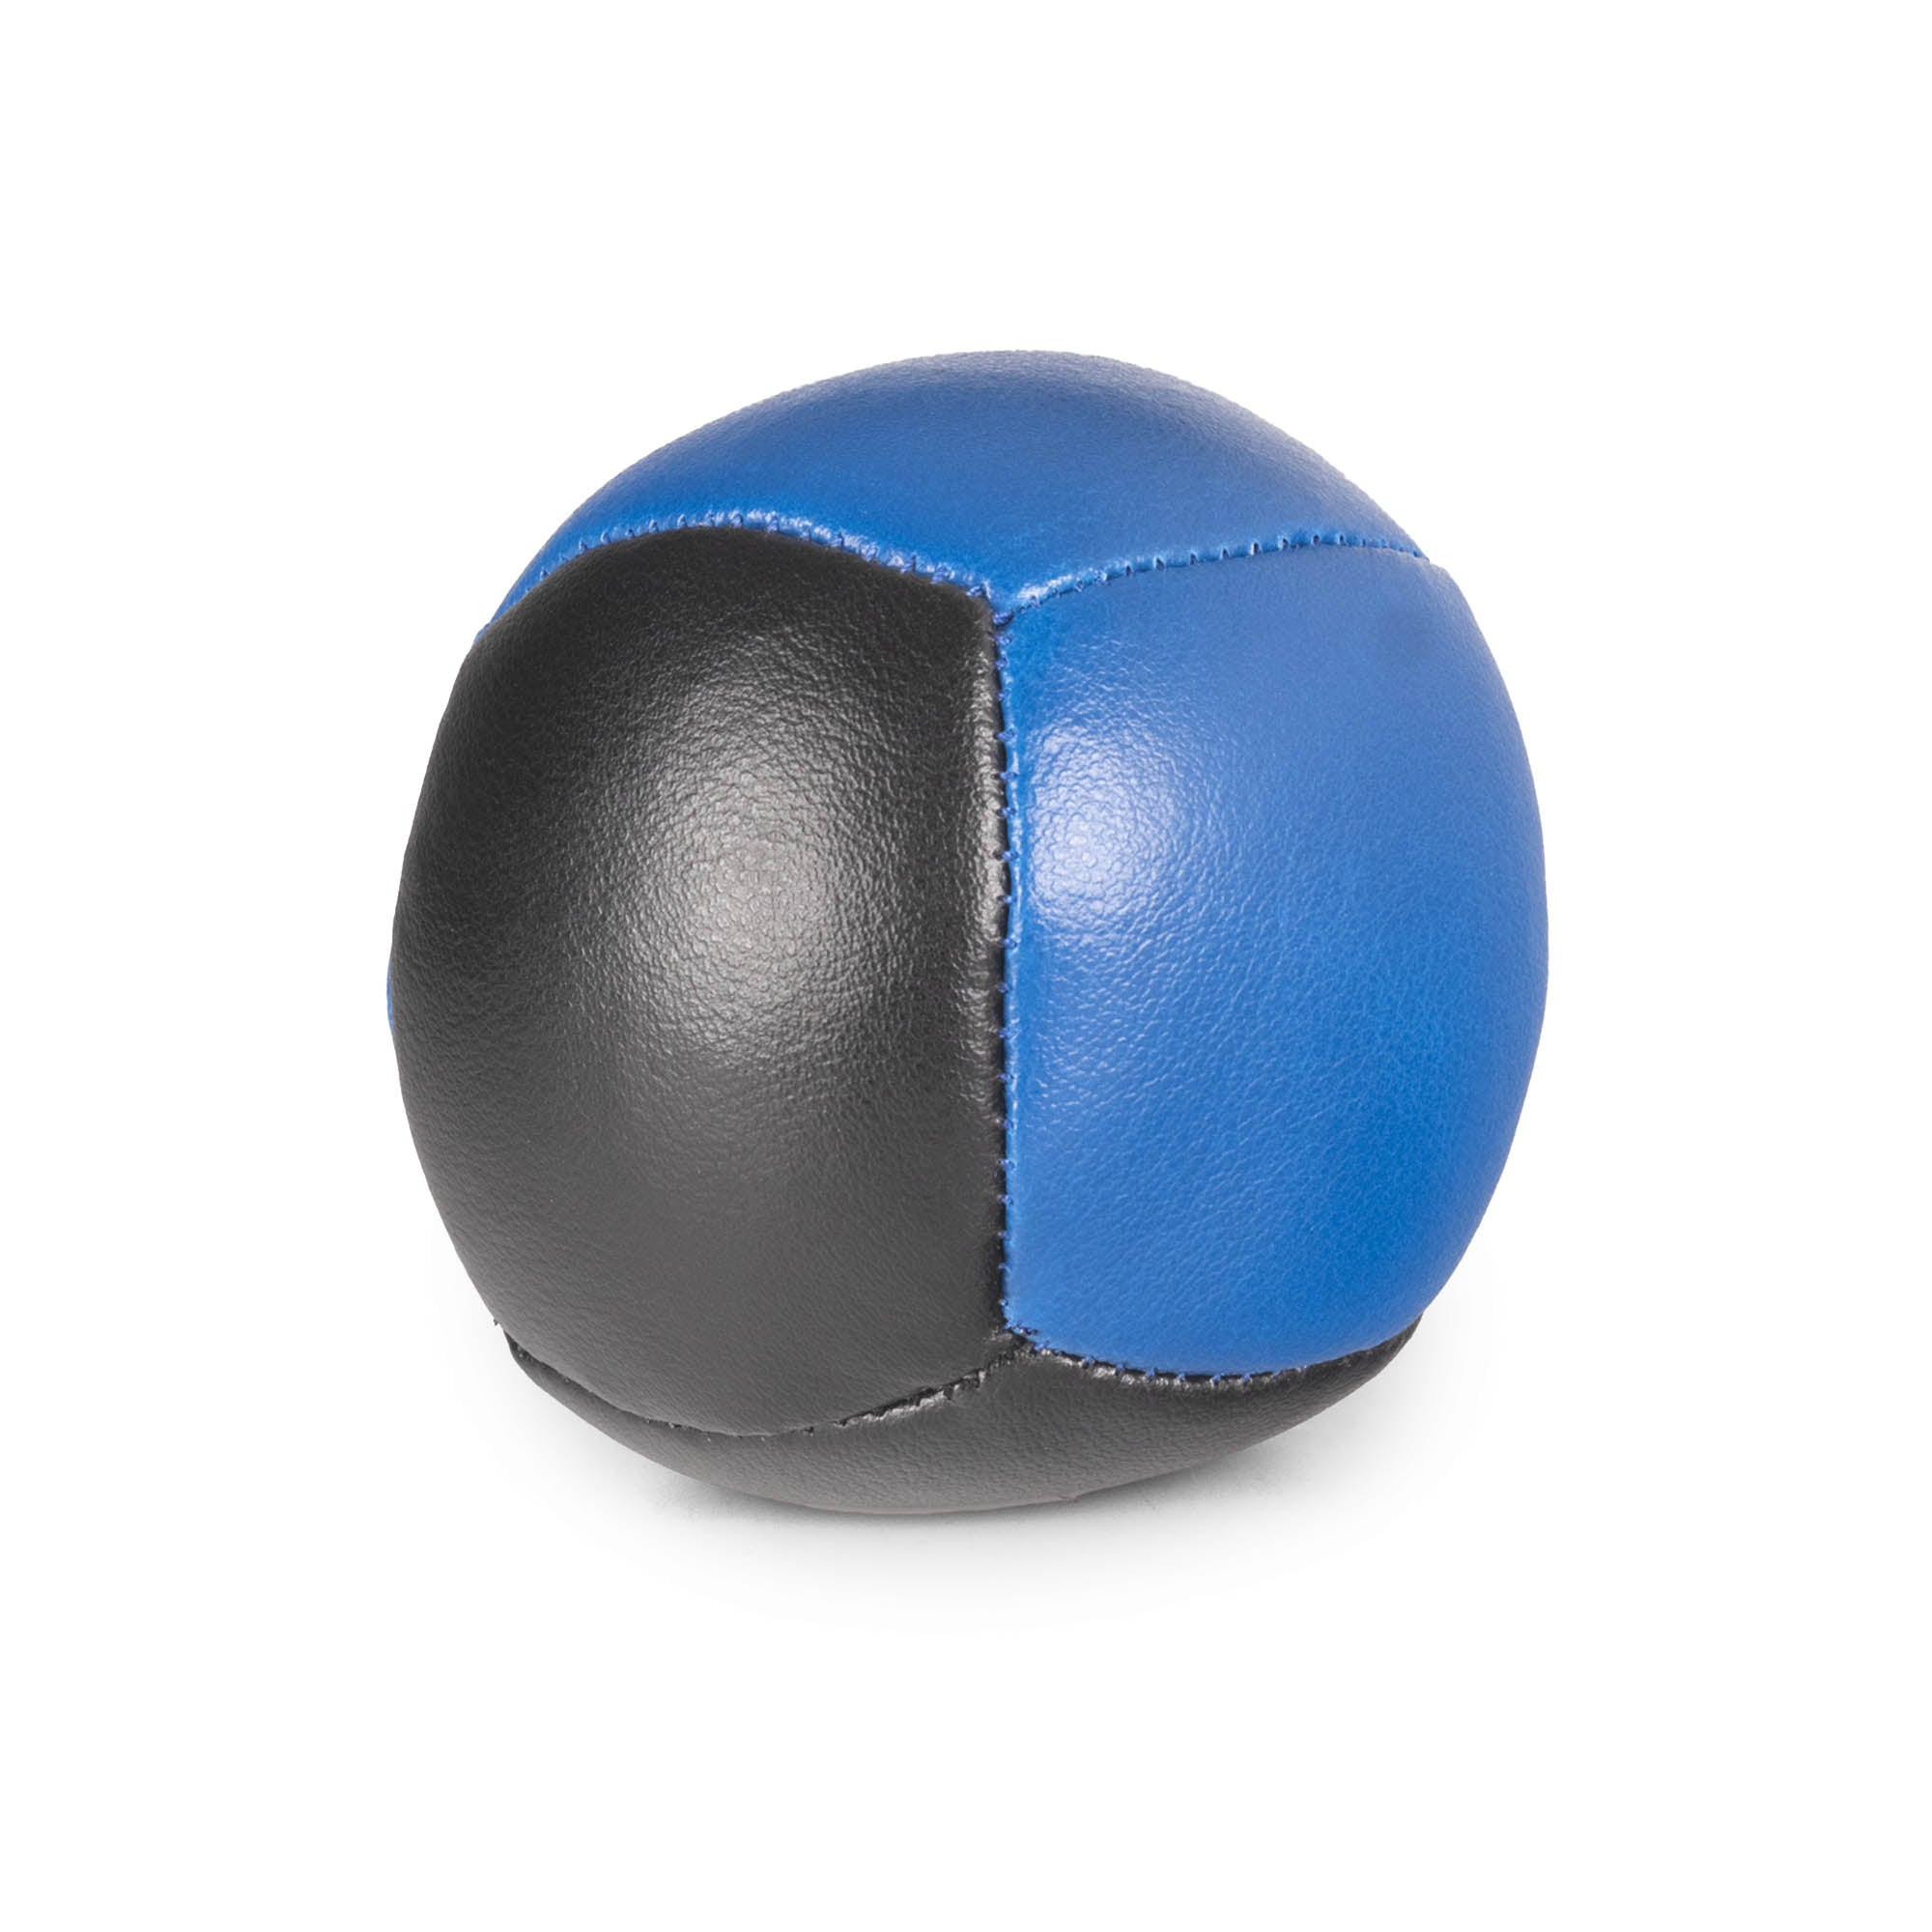 Firetoys blue/black 110g thud juggling ball, straight on in a white background